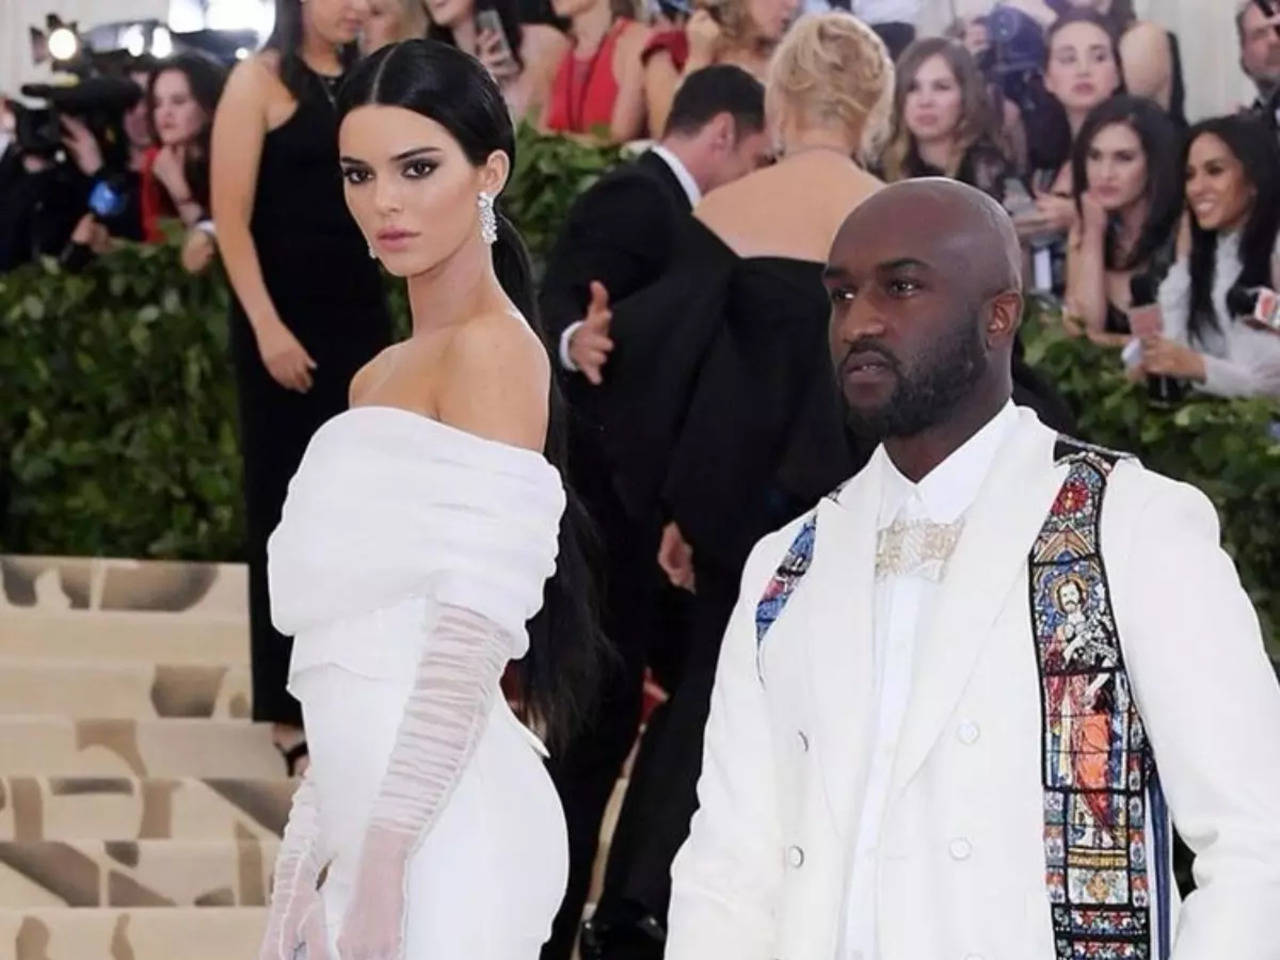 VERSACE on X: The Versace team would like to extend our deepest  condolences at the sad news of Virgil Abloh's passing. A visionary within  the world of fashion, his presence will be